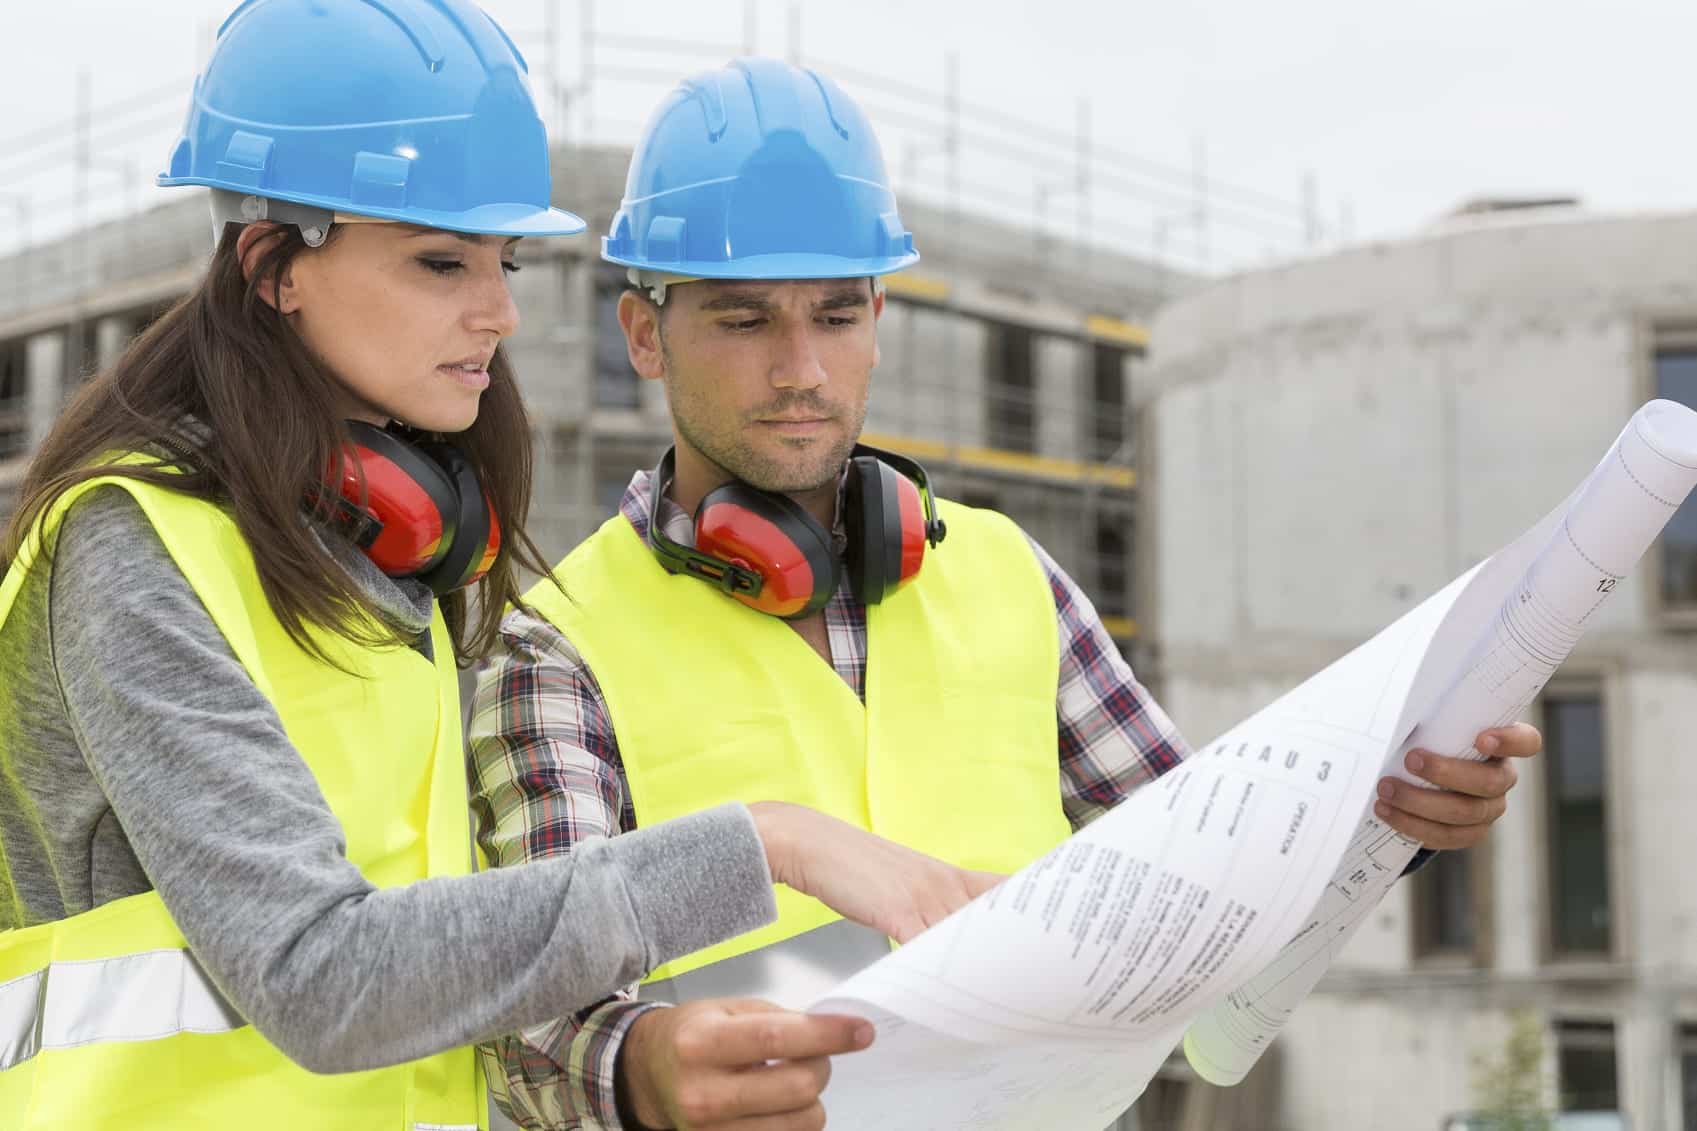 5 Self-Improvement Lessons You Can Learn from a Construction Site